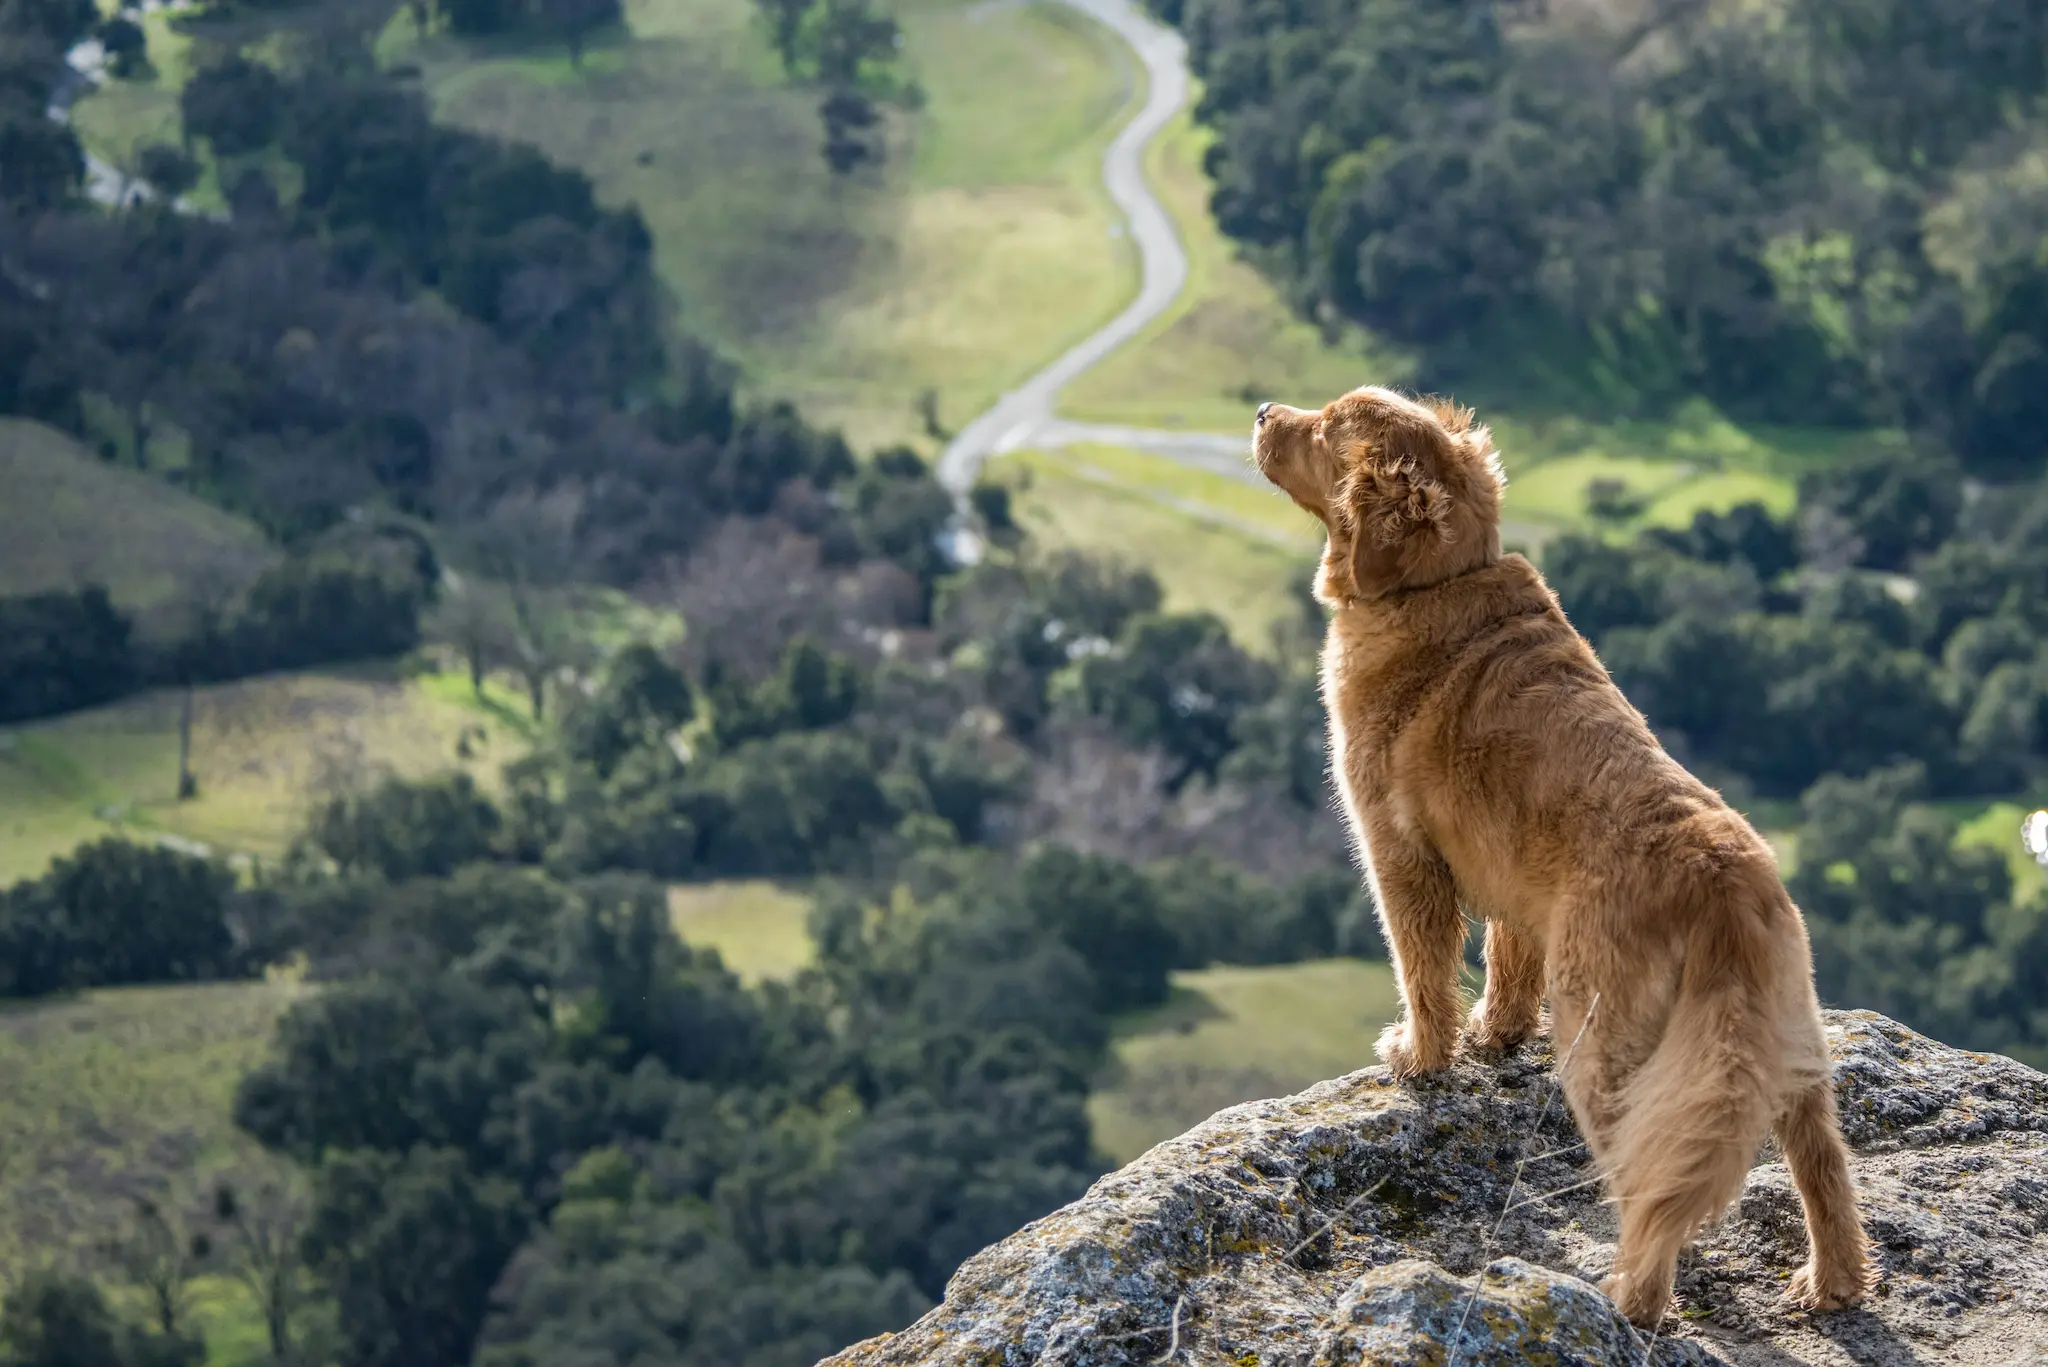 A golden retriever stadning on the edge of a large cliff overlooking a beautiful lush valley. The dog is looking out into the distance with a happy expression on its face. The sun is setting in the background, casting a warm glow over the entire scene.